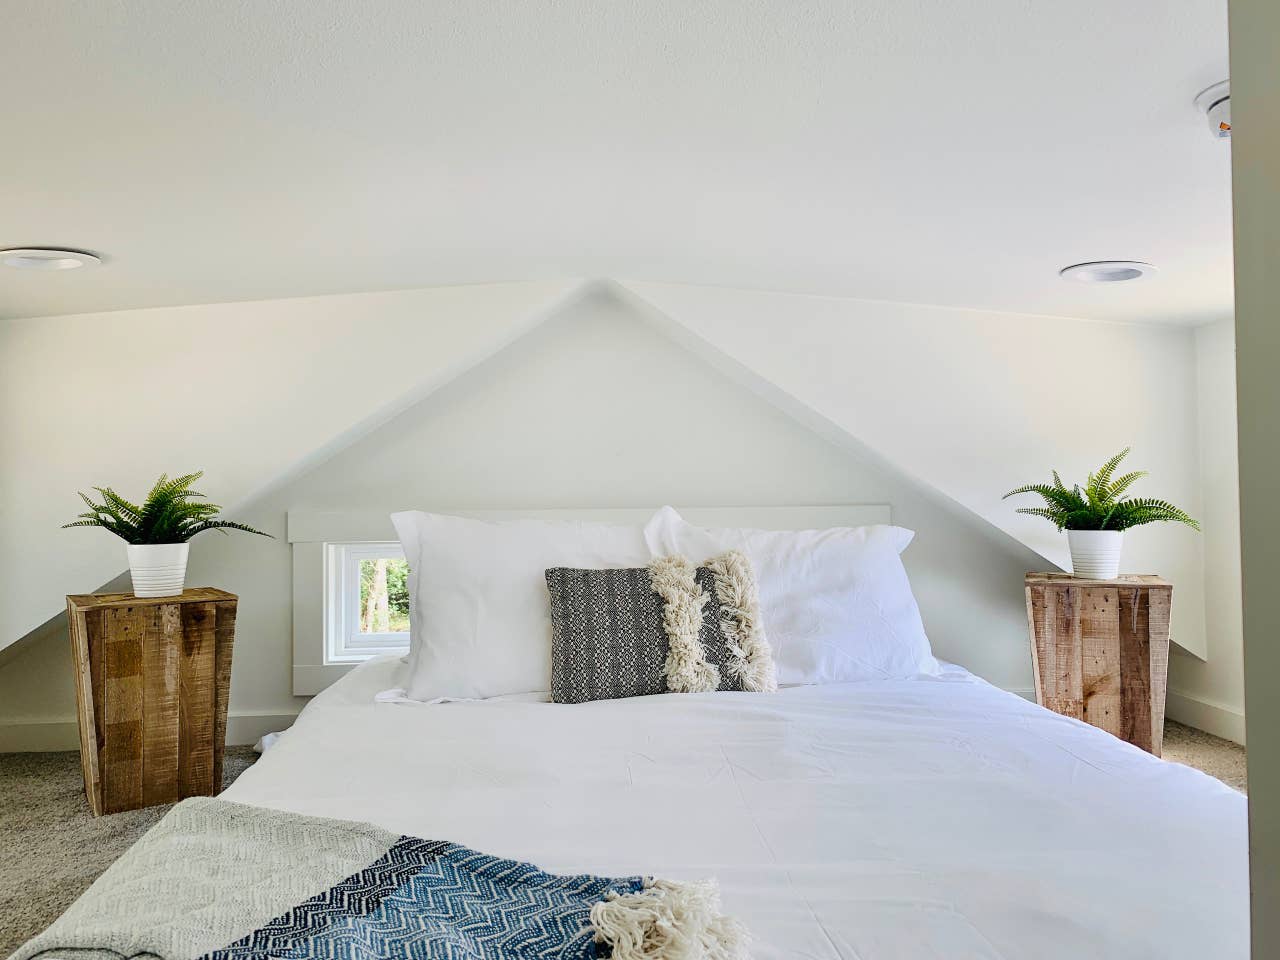 2nd bedroom/loft space with a treehouse feel. Enjoy an afternoon nap in the plush queen-size bed, or settle in for the night after a long day.